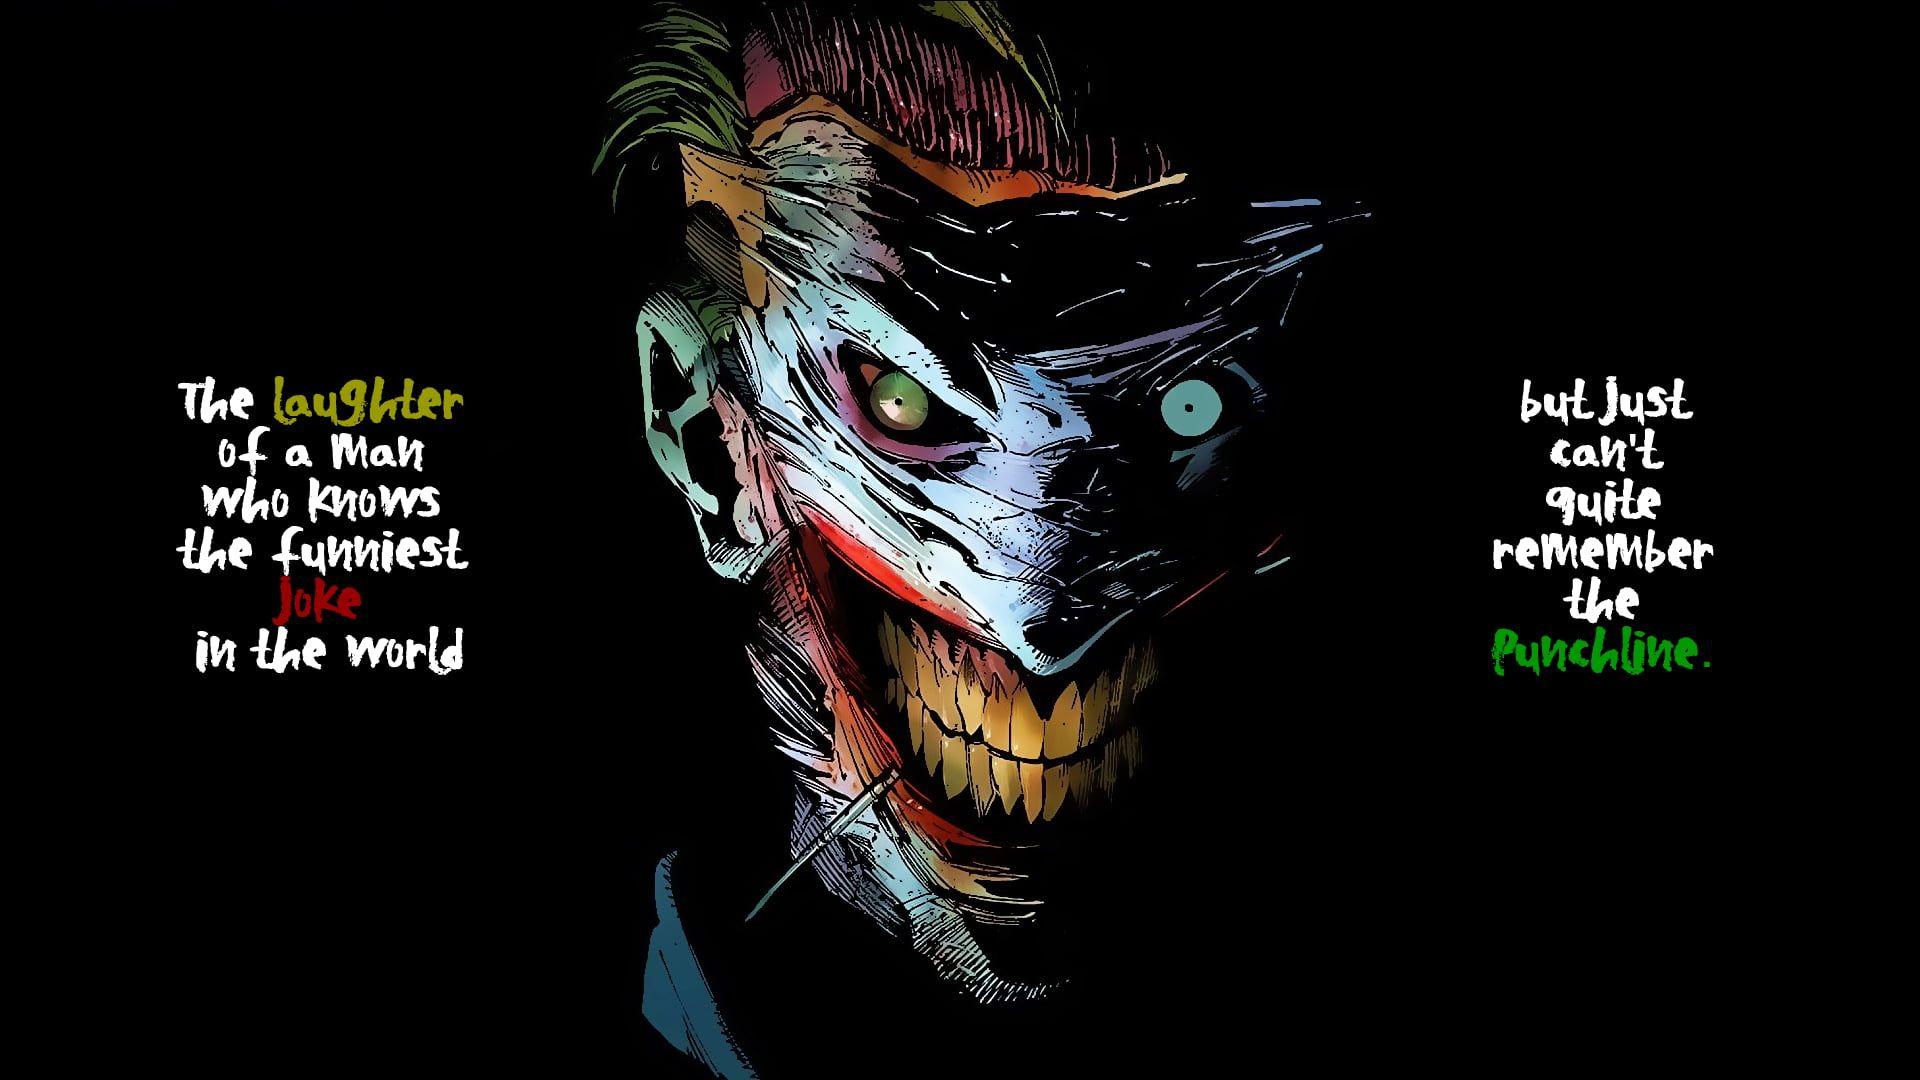 Joker Quotes Hd Wallpapers Top Free Joker Quotes Hd Backgrounds Wallpaperaccess 